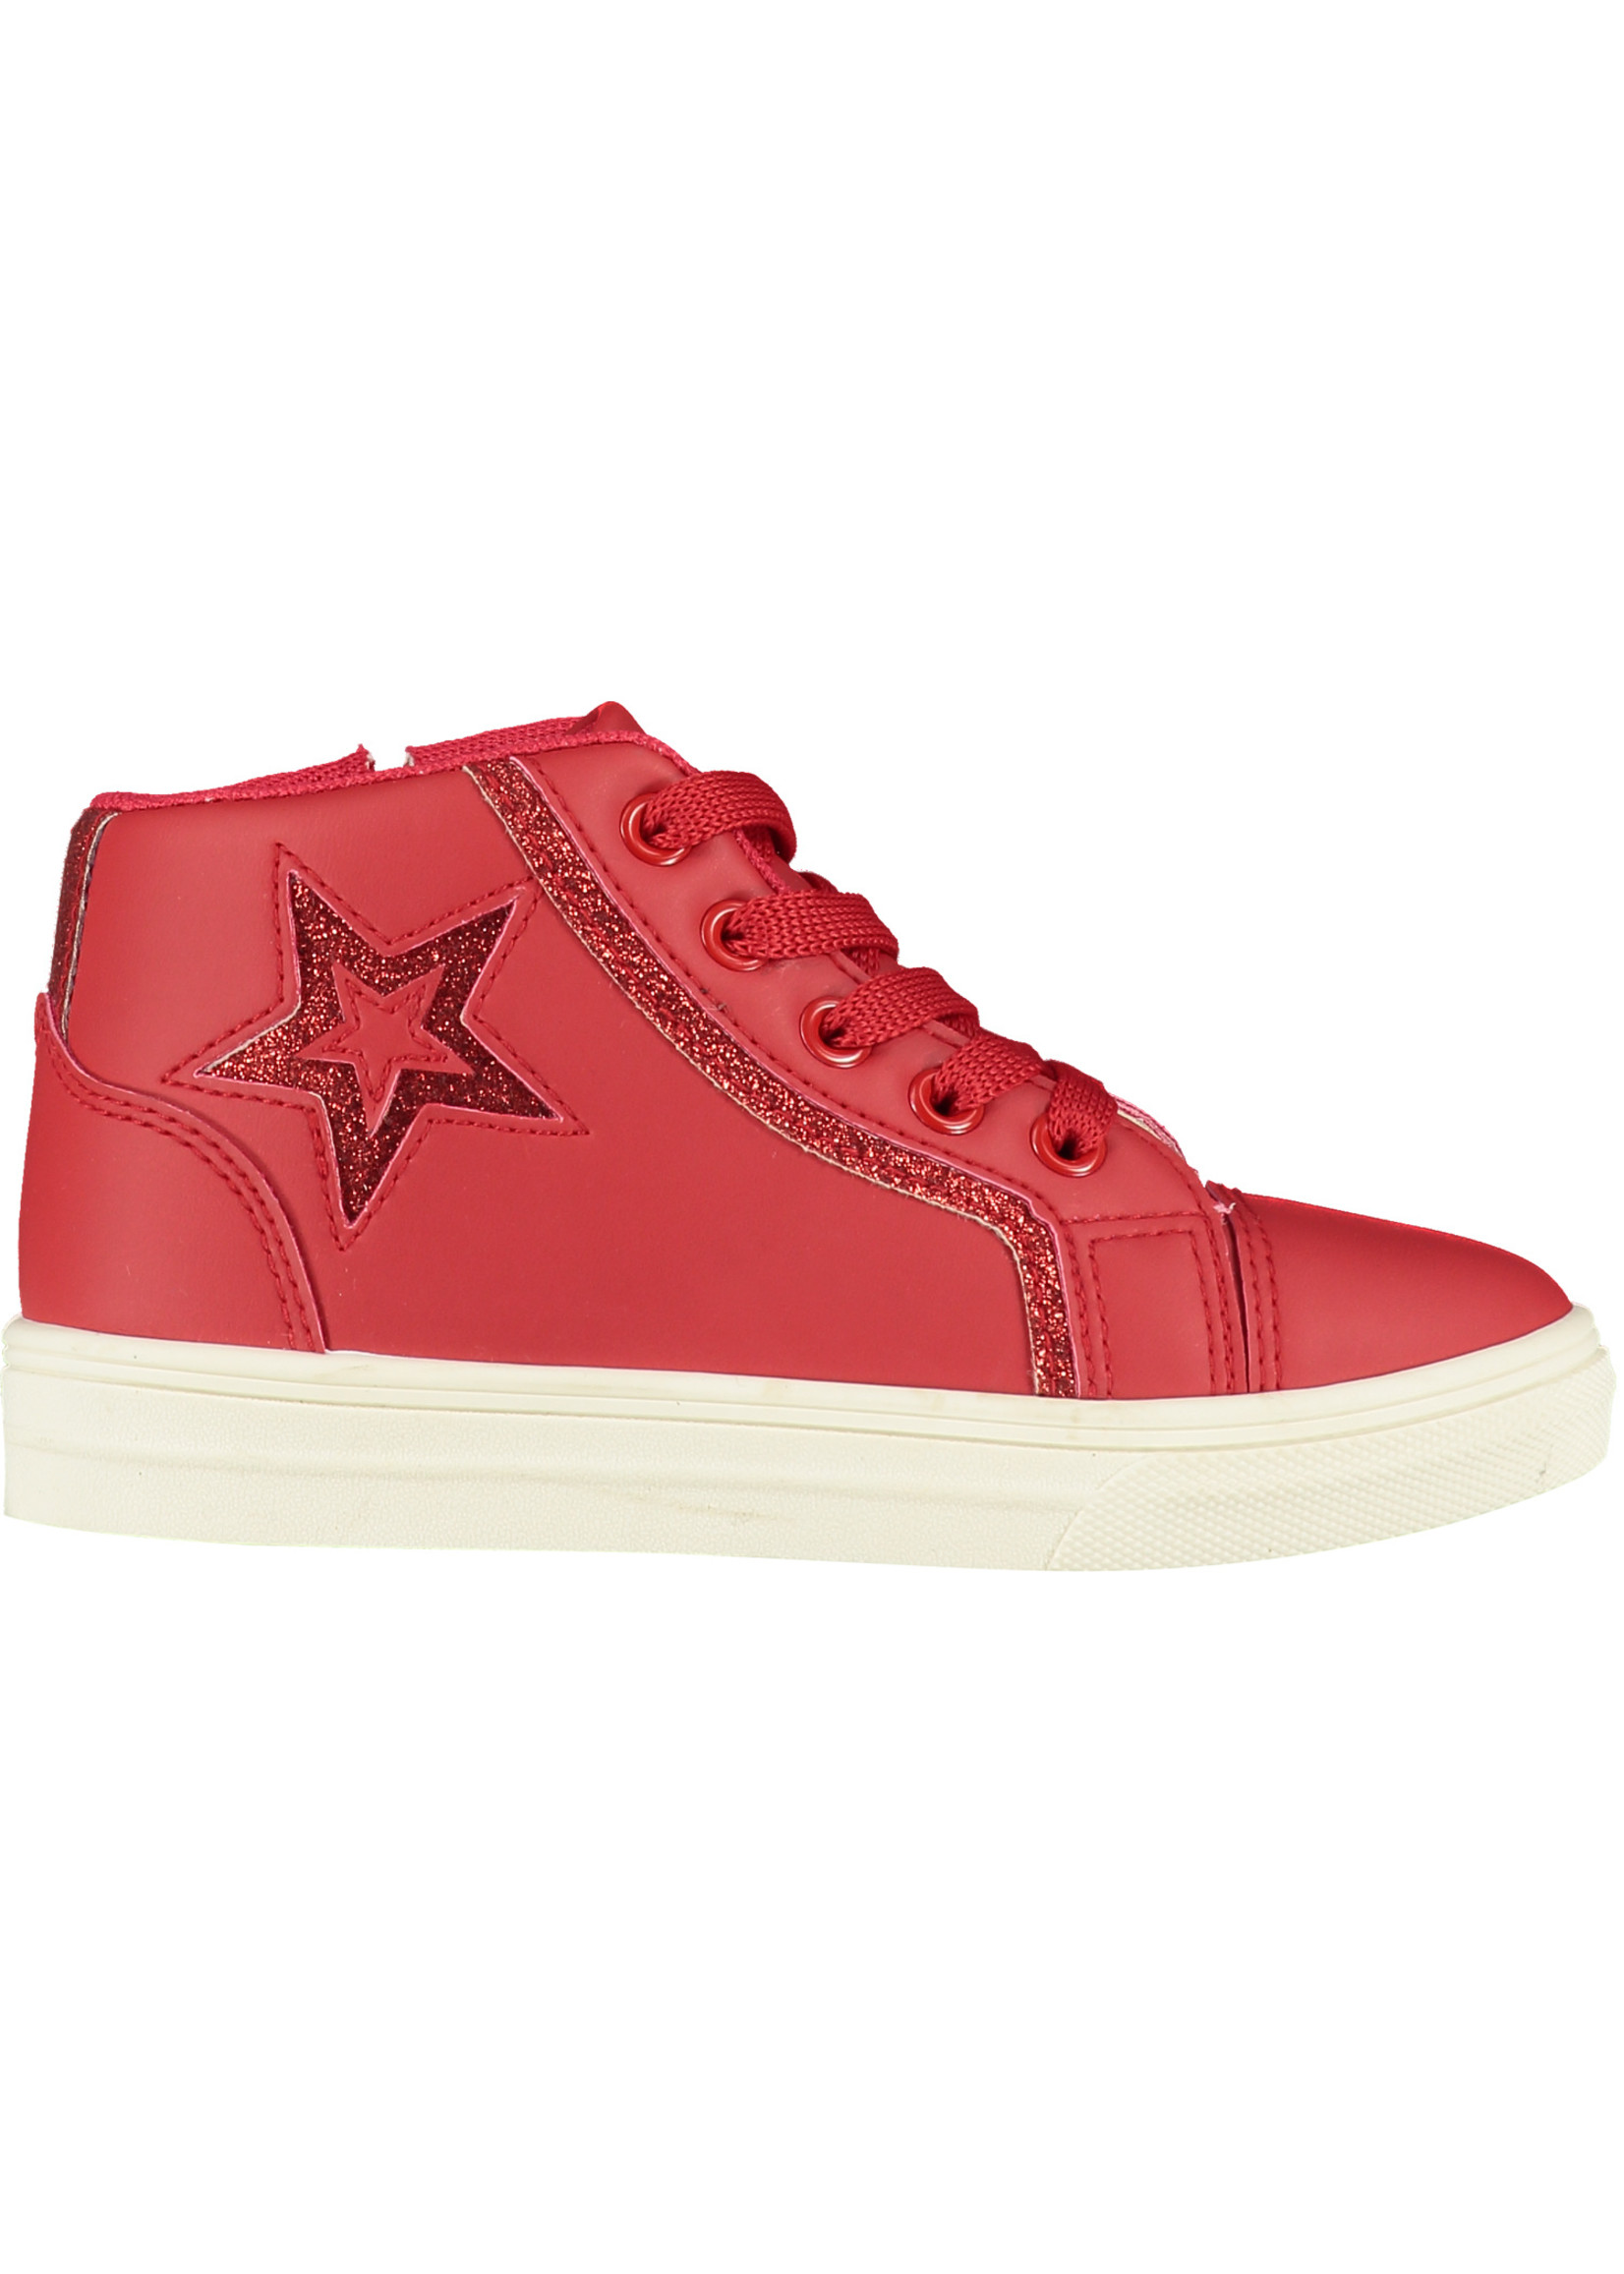 A Dee A Dee STAR Star high top trainer Red